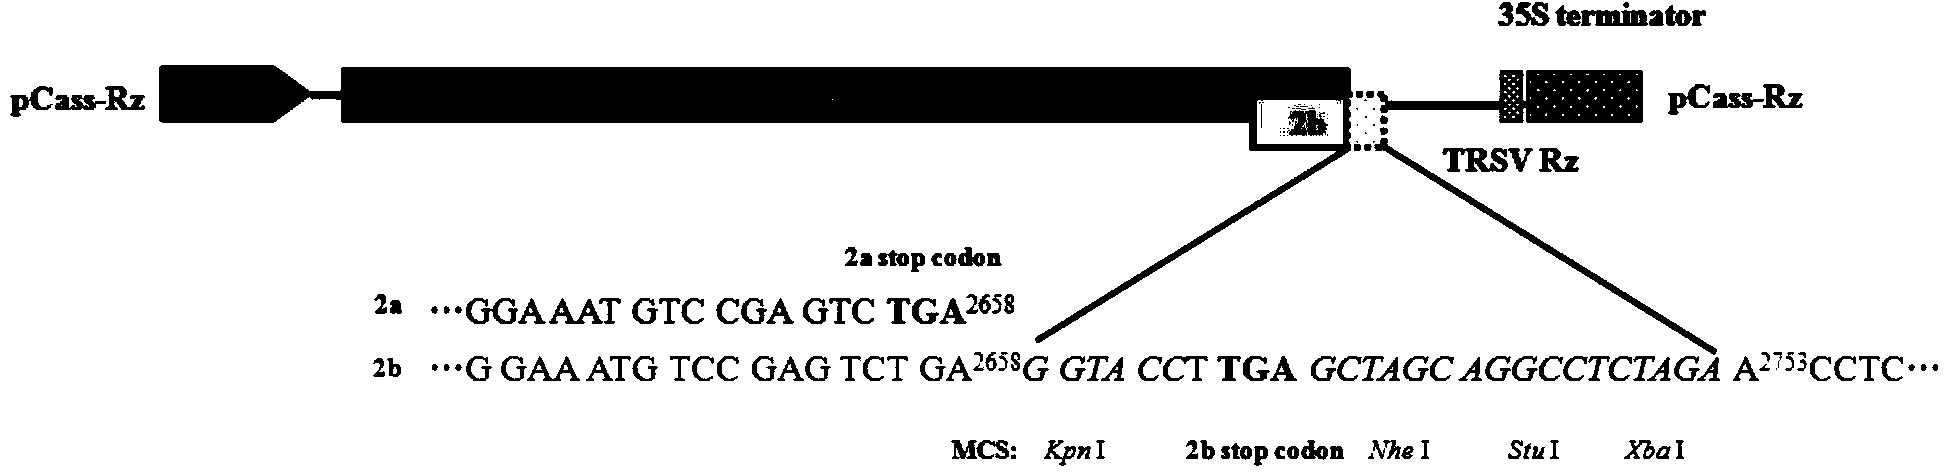 Cucumber mosaic virus induced gene silencing system and application thereof